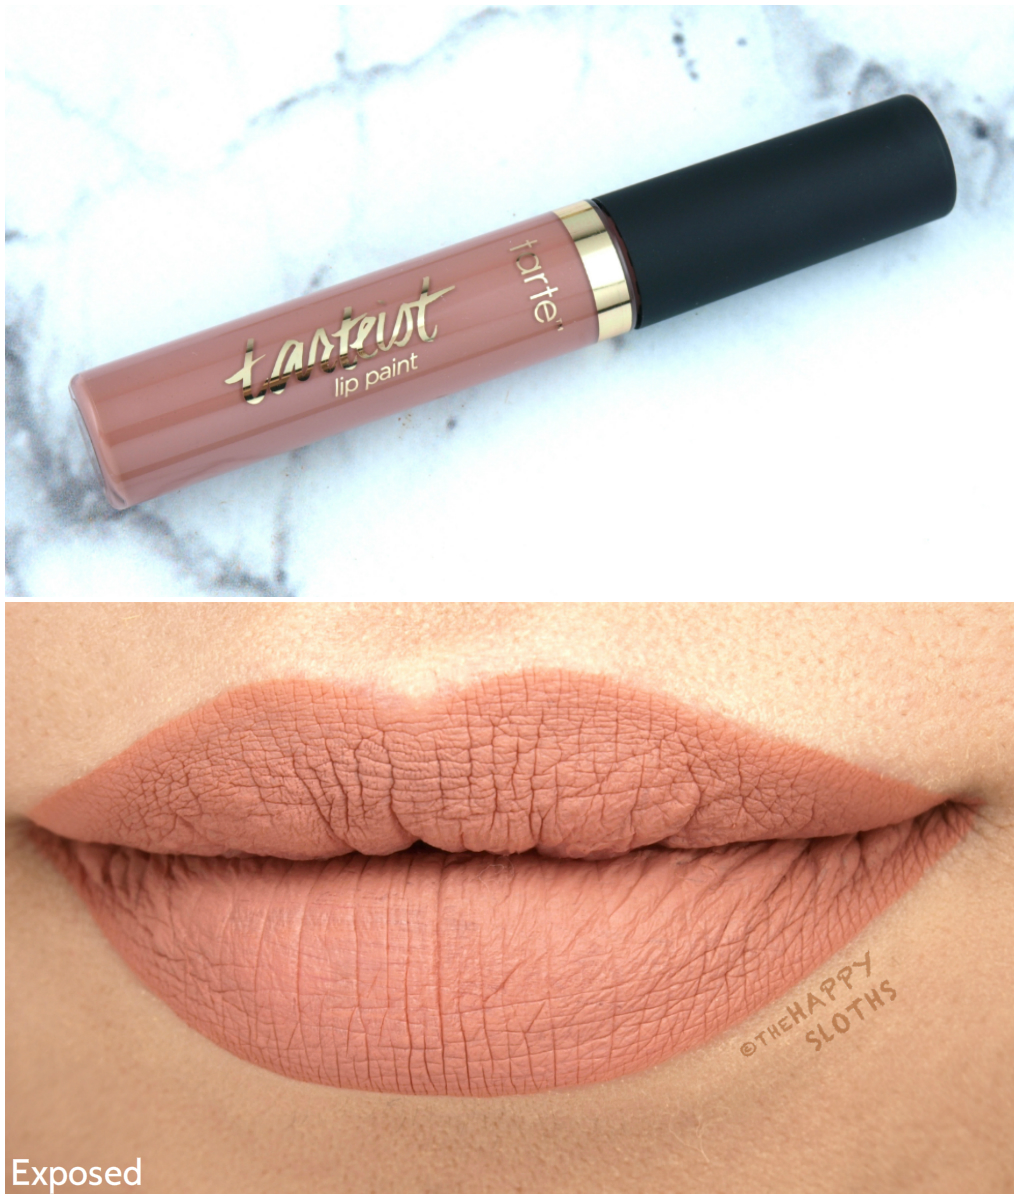 Tarte Tarteist Quick Dry Lip Paint in "Exposed": Review and Swatches